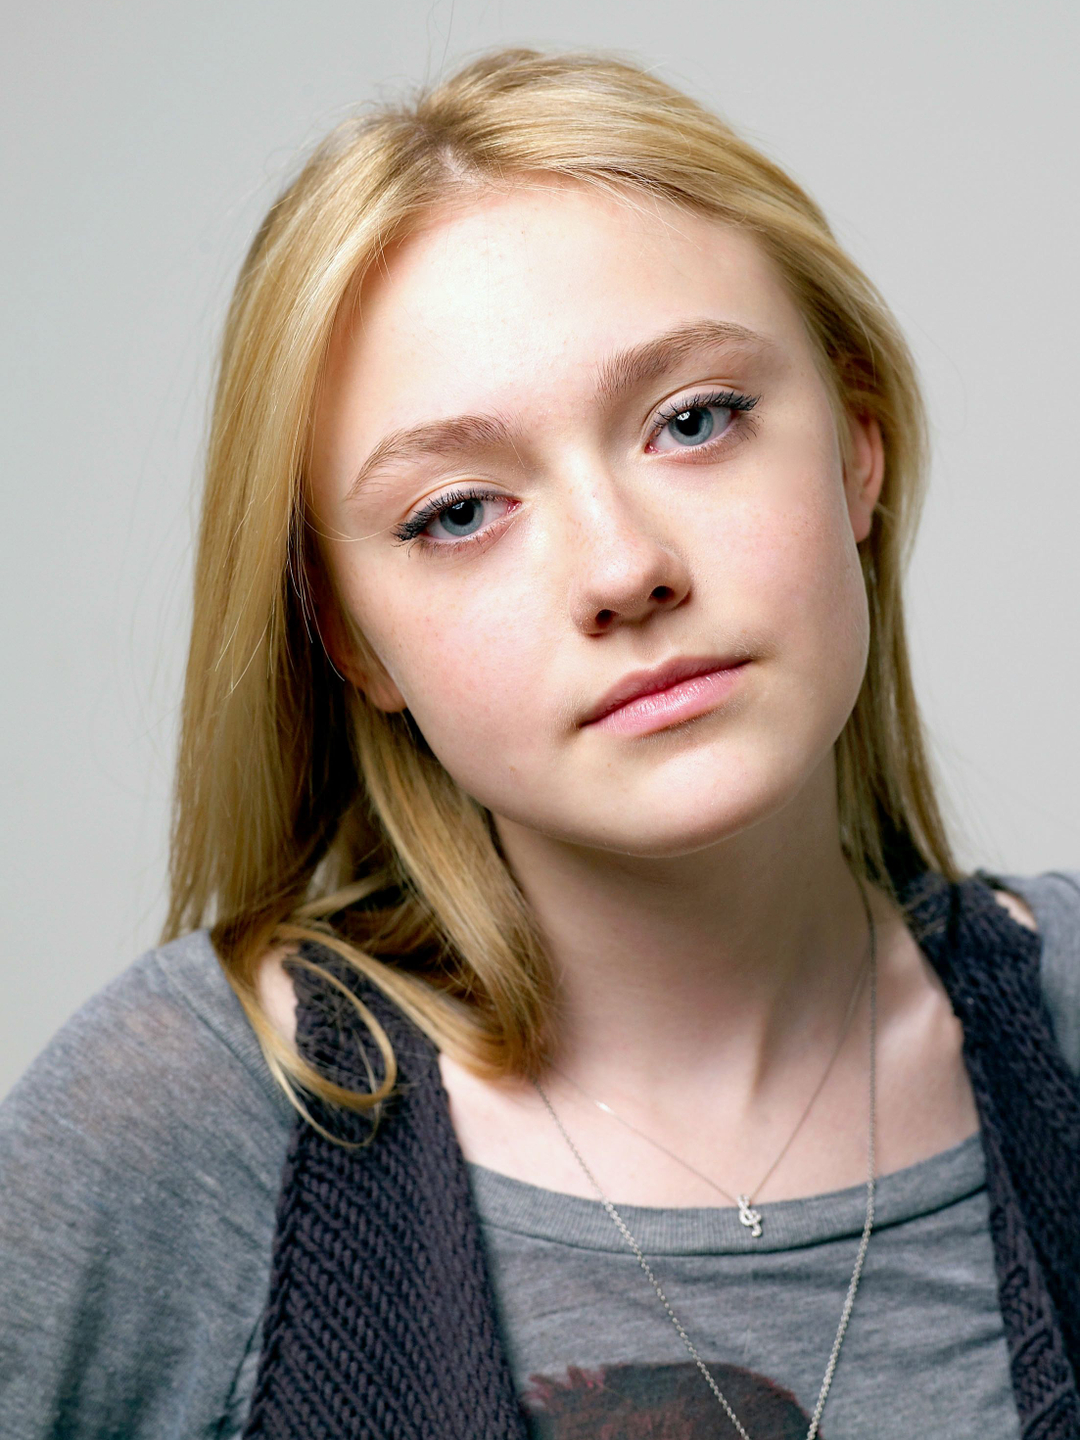 Dakota Fanning who is her father